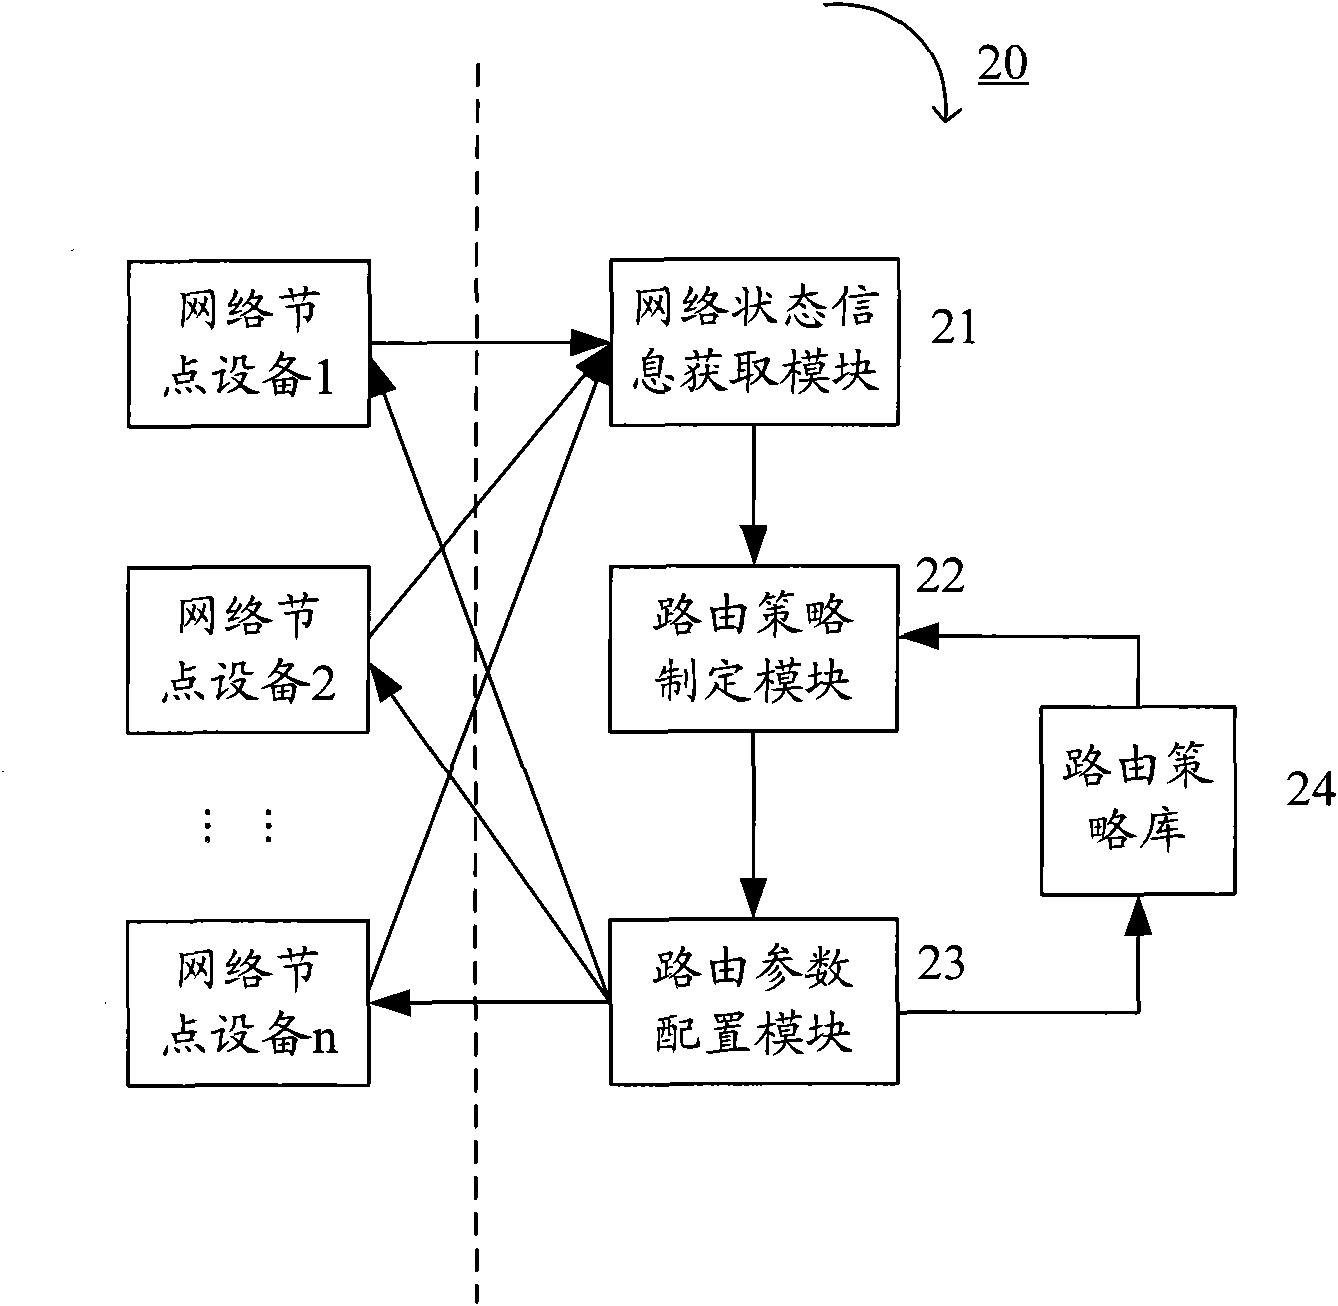 Cognitive routing protocol and implementation method thereof